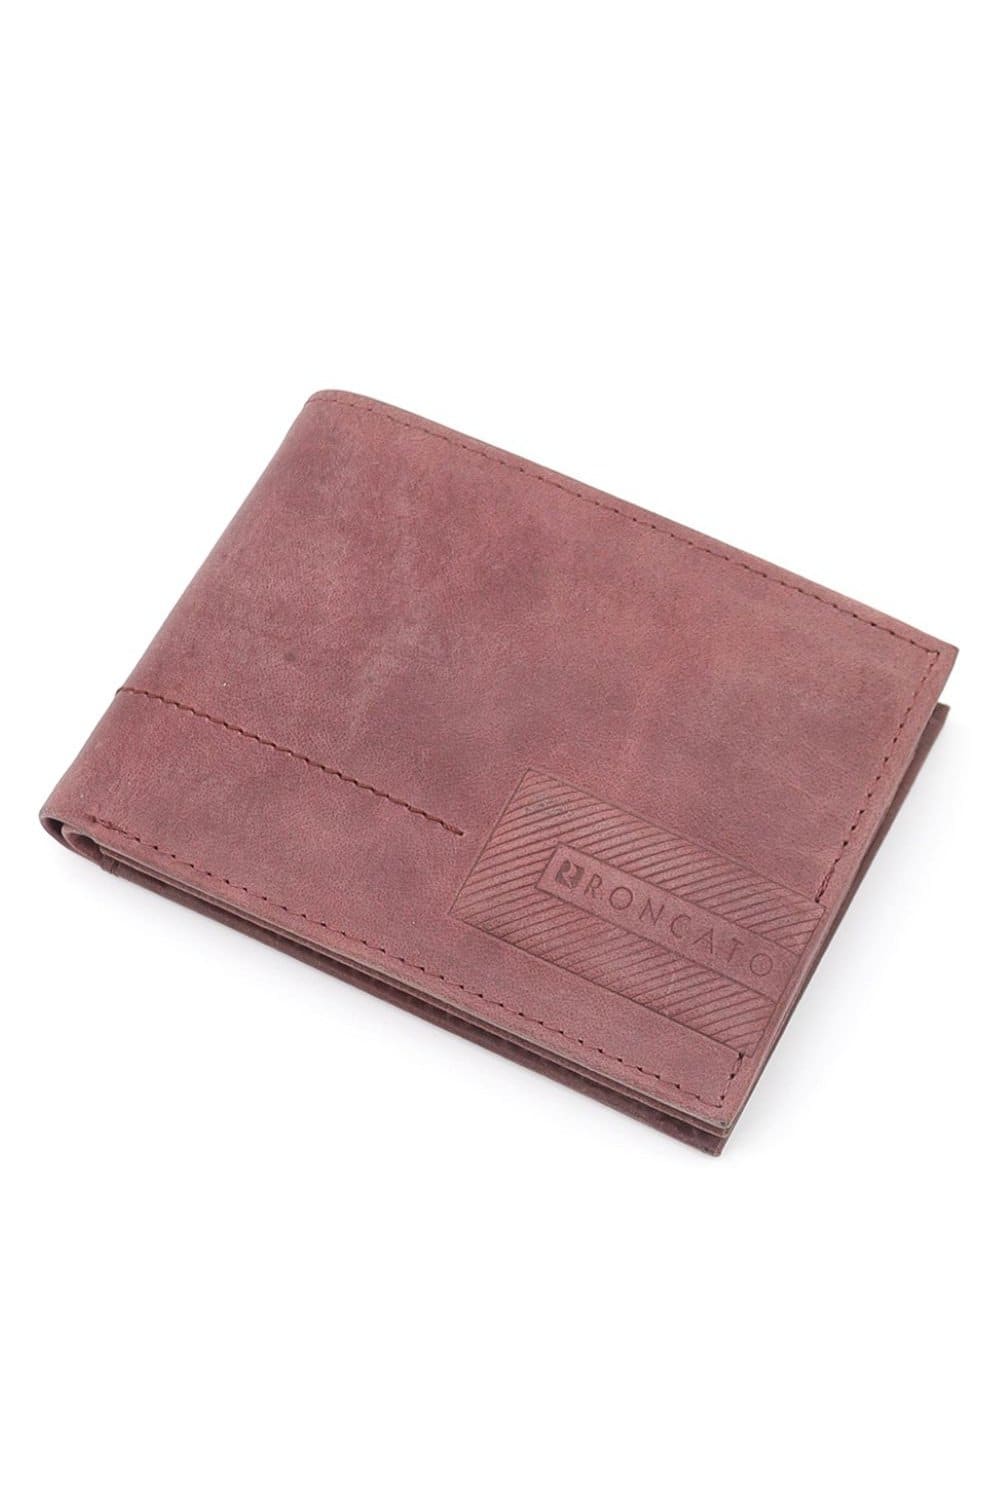 R. Roncato Men's Wallet in Nappa Leather, Equipped With Coin Purse, Document Holder in Card Format, Card Holder, Red Fatio General Trading